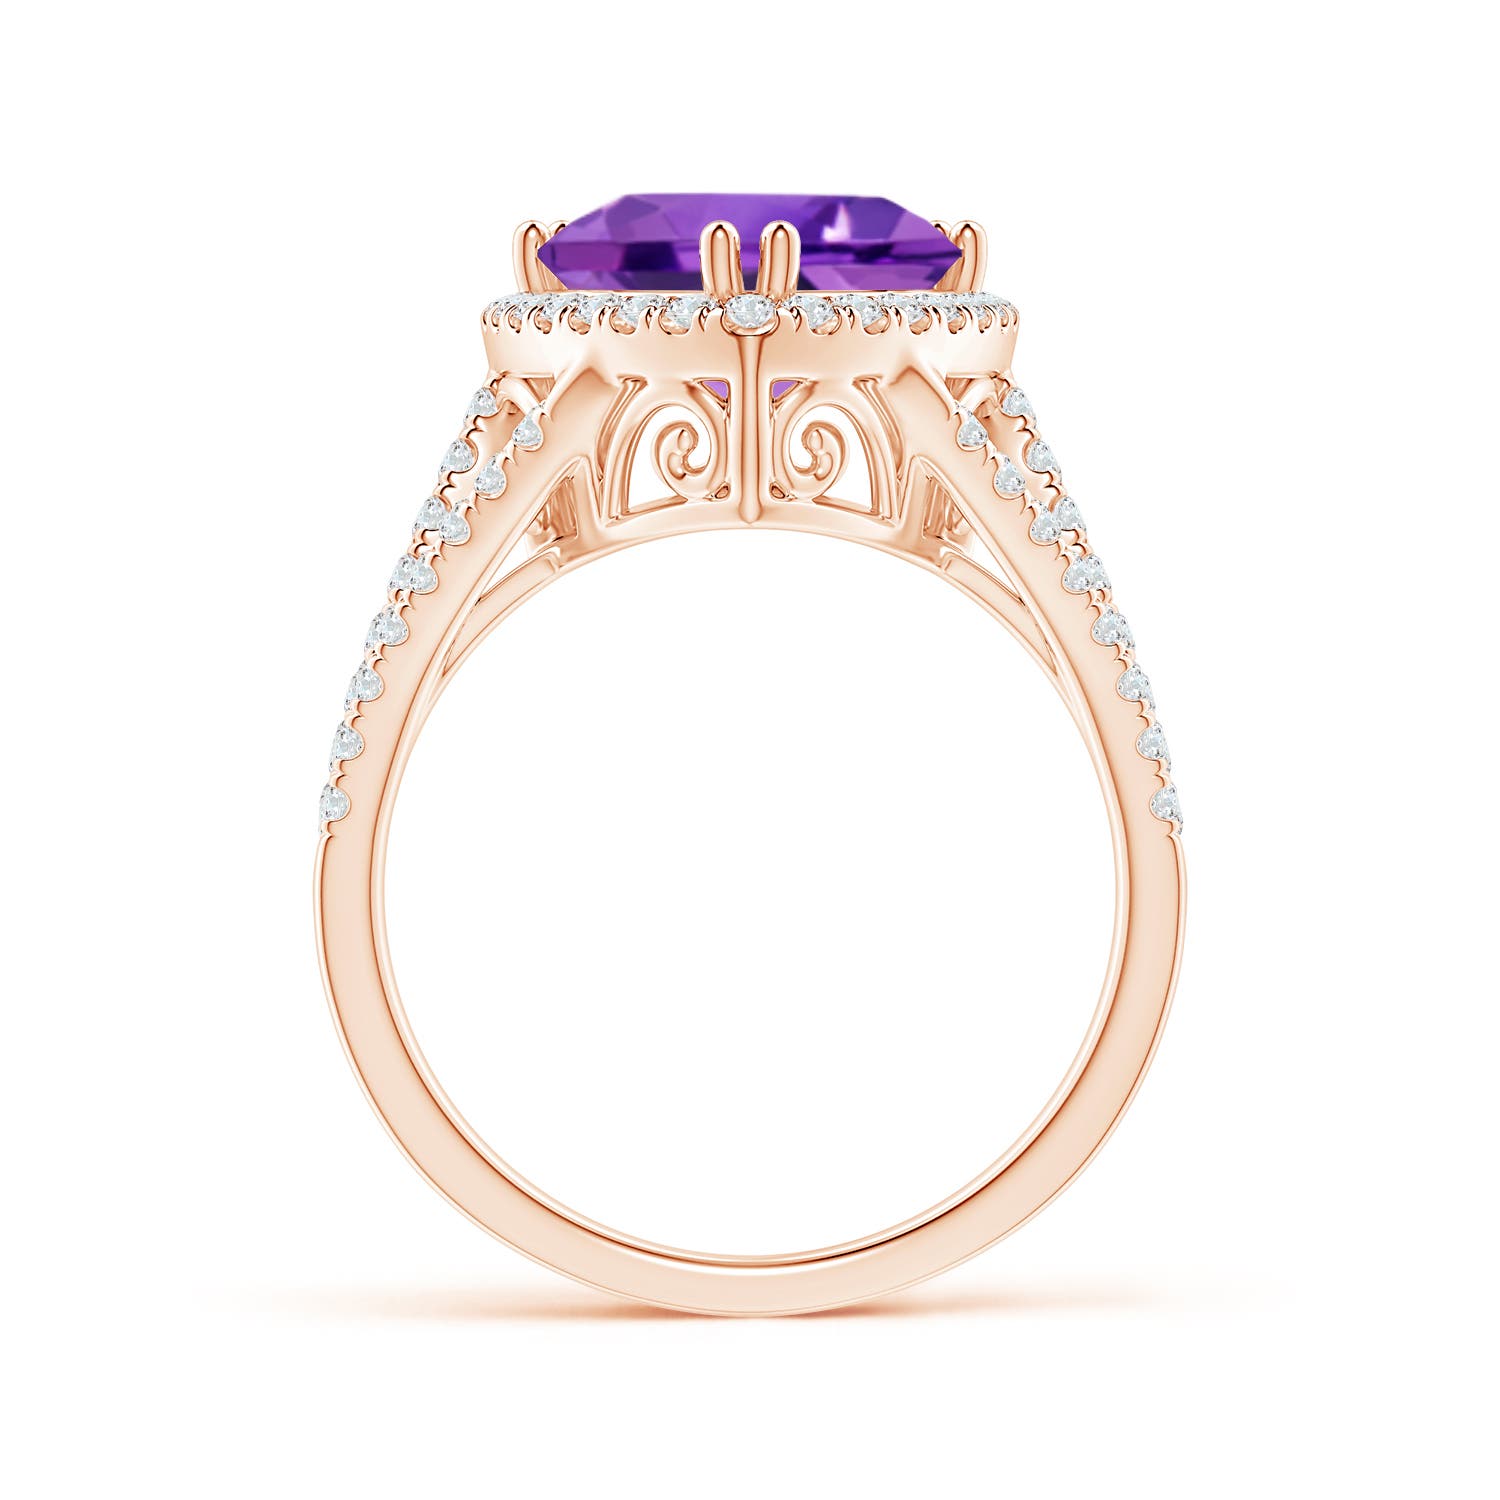 AAA - Amethyst / 3.16 CT / 14 KT Rose Gold